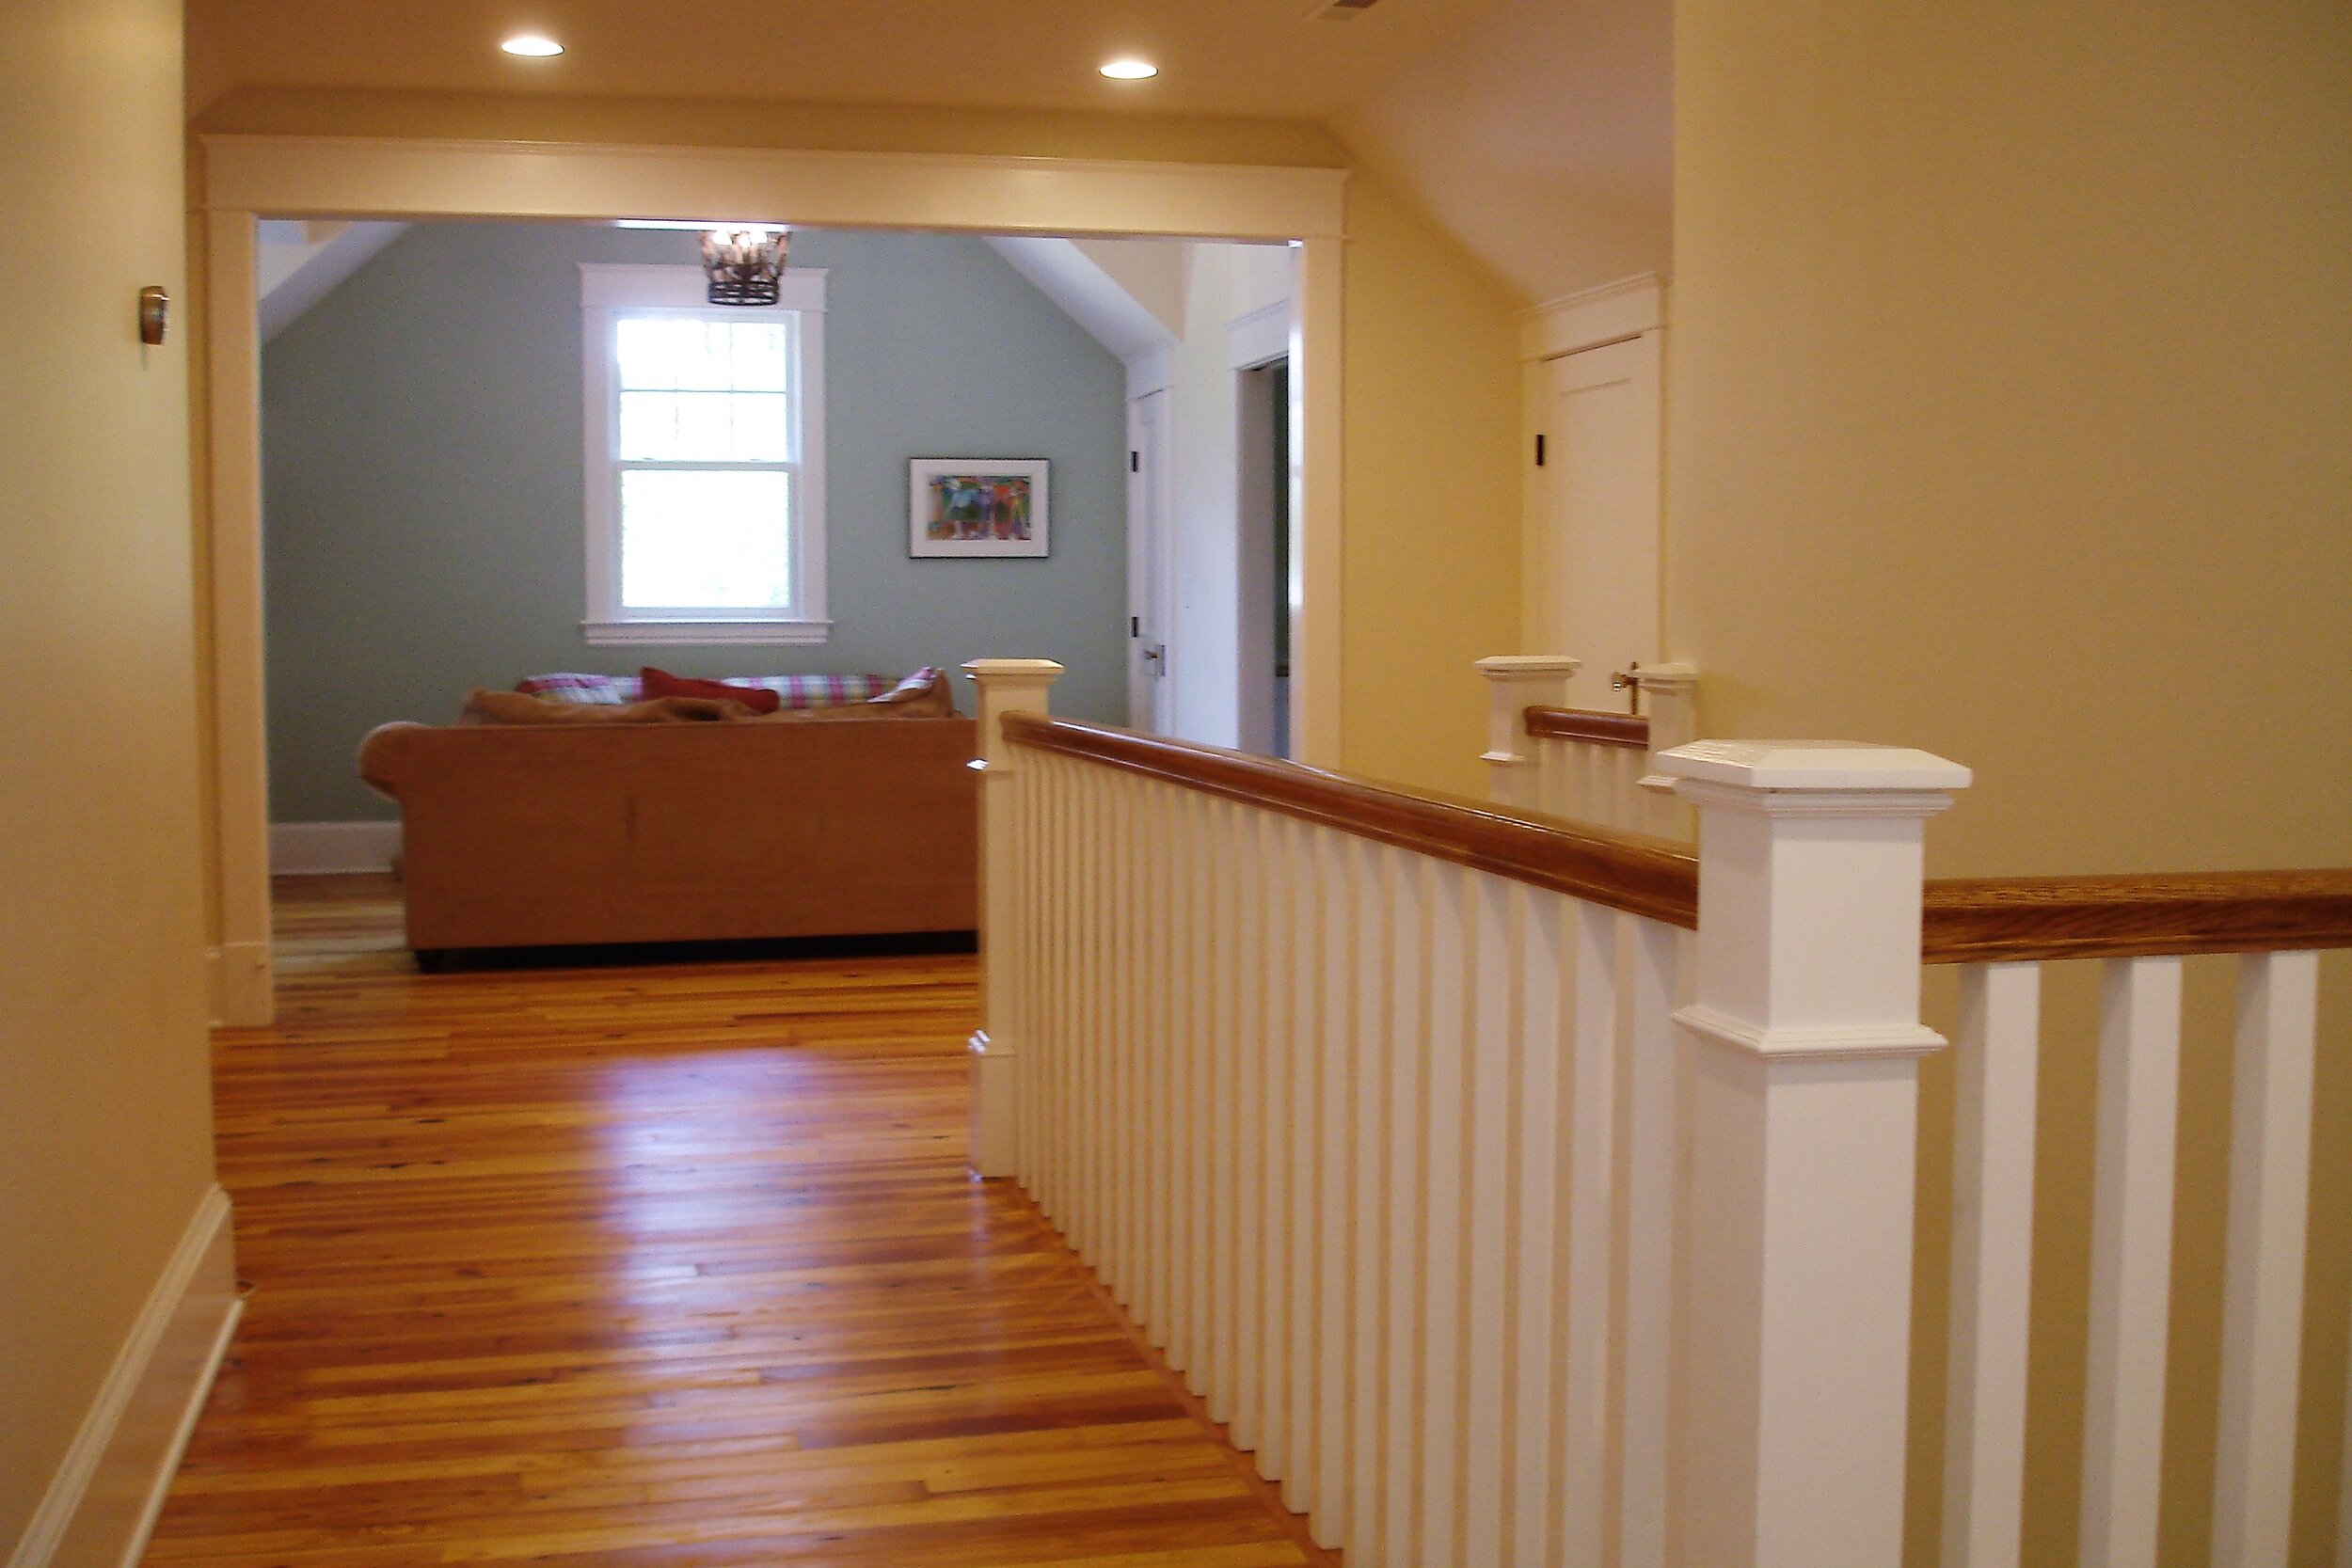 View of the upstairs rails and playroom with reclaimed heart pine floors.